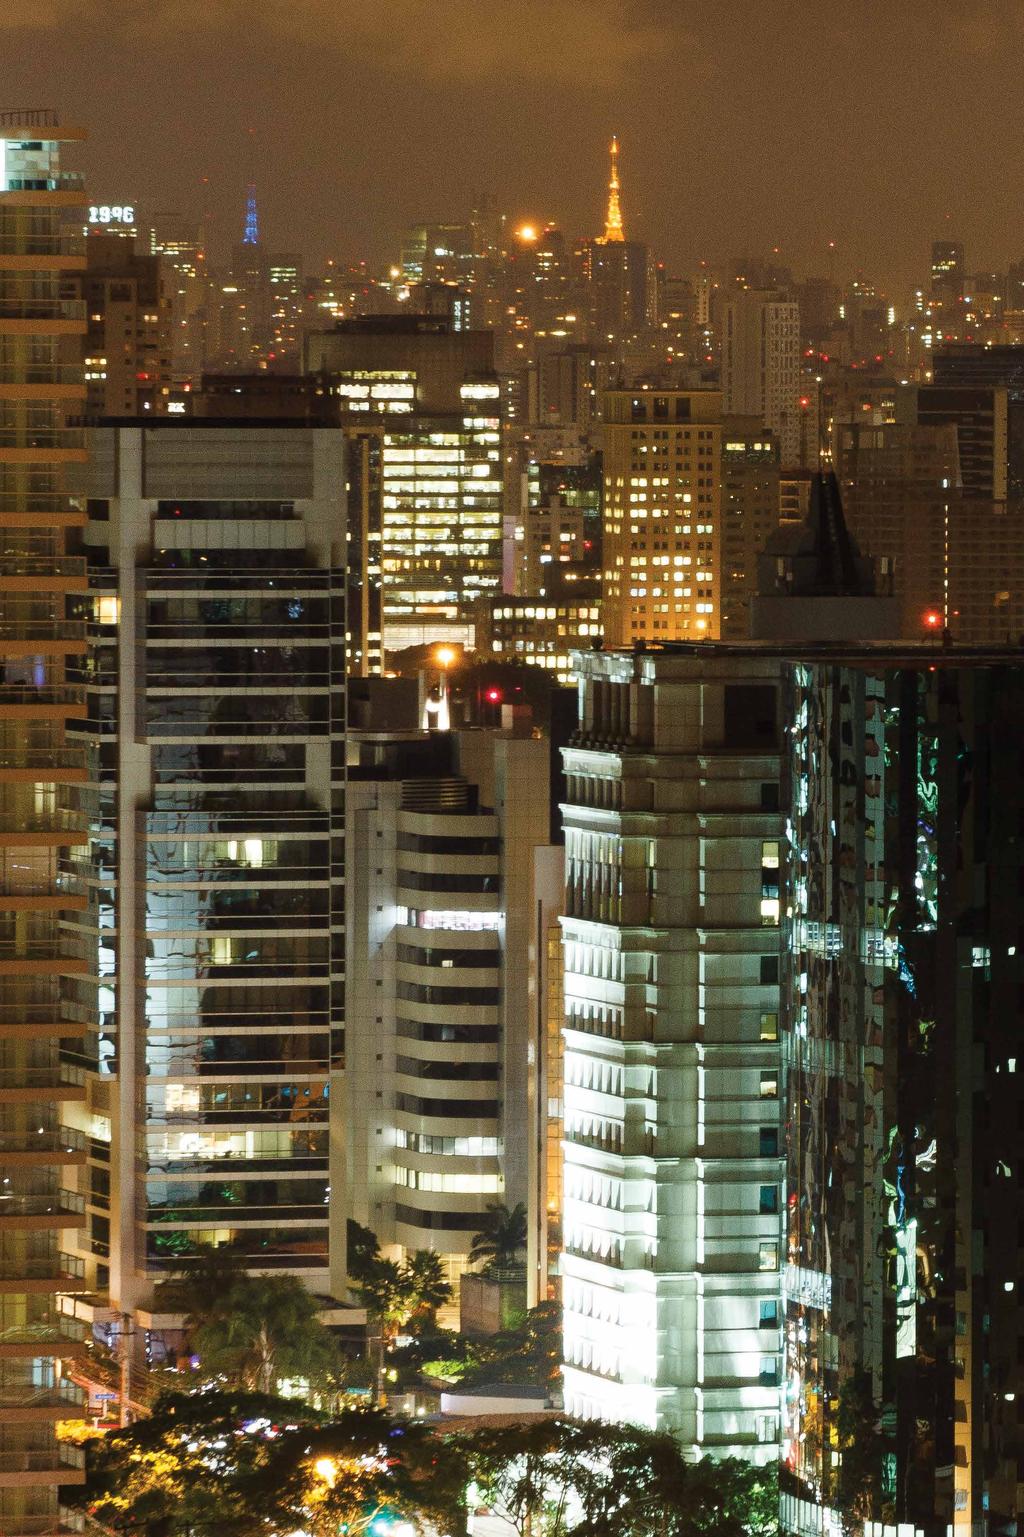 SÃO PAULO São Paulo is one of the largest and most vibrant cities in the world, considered Brazil s capital of business, culture and arts, cuisine and shopping.